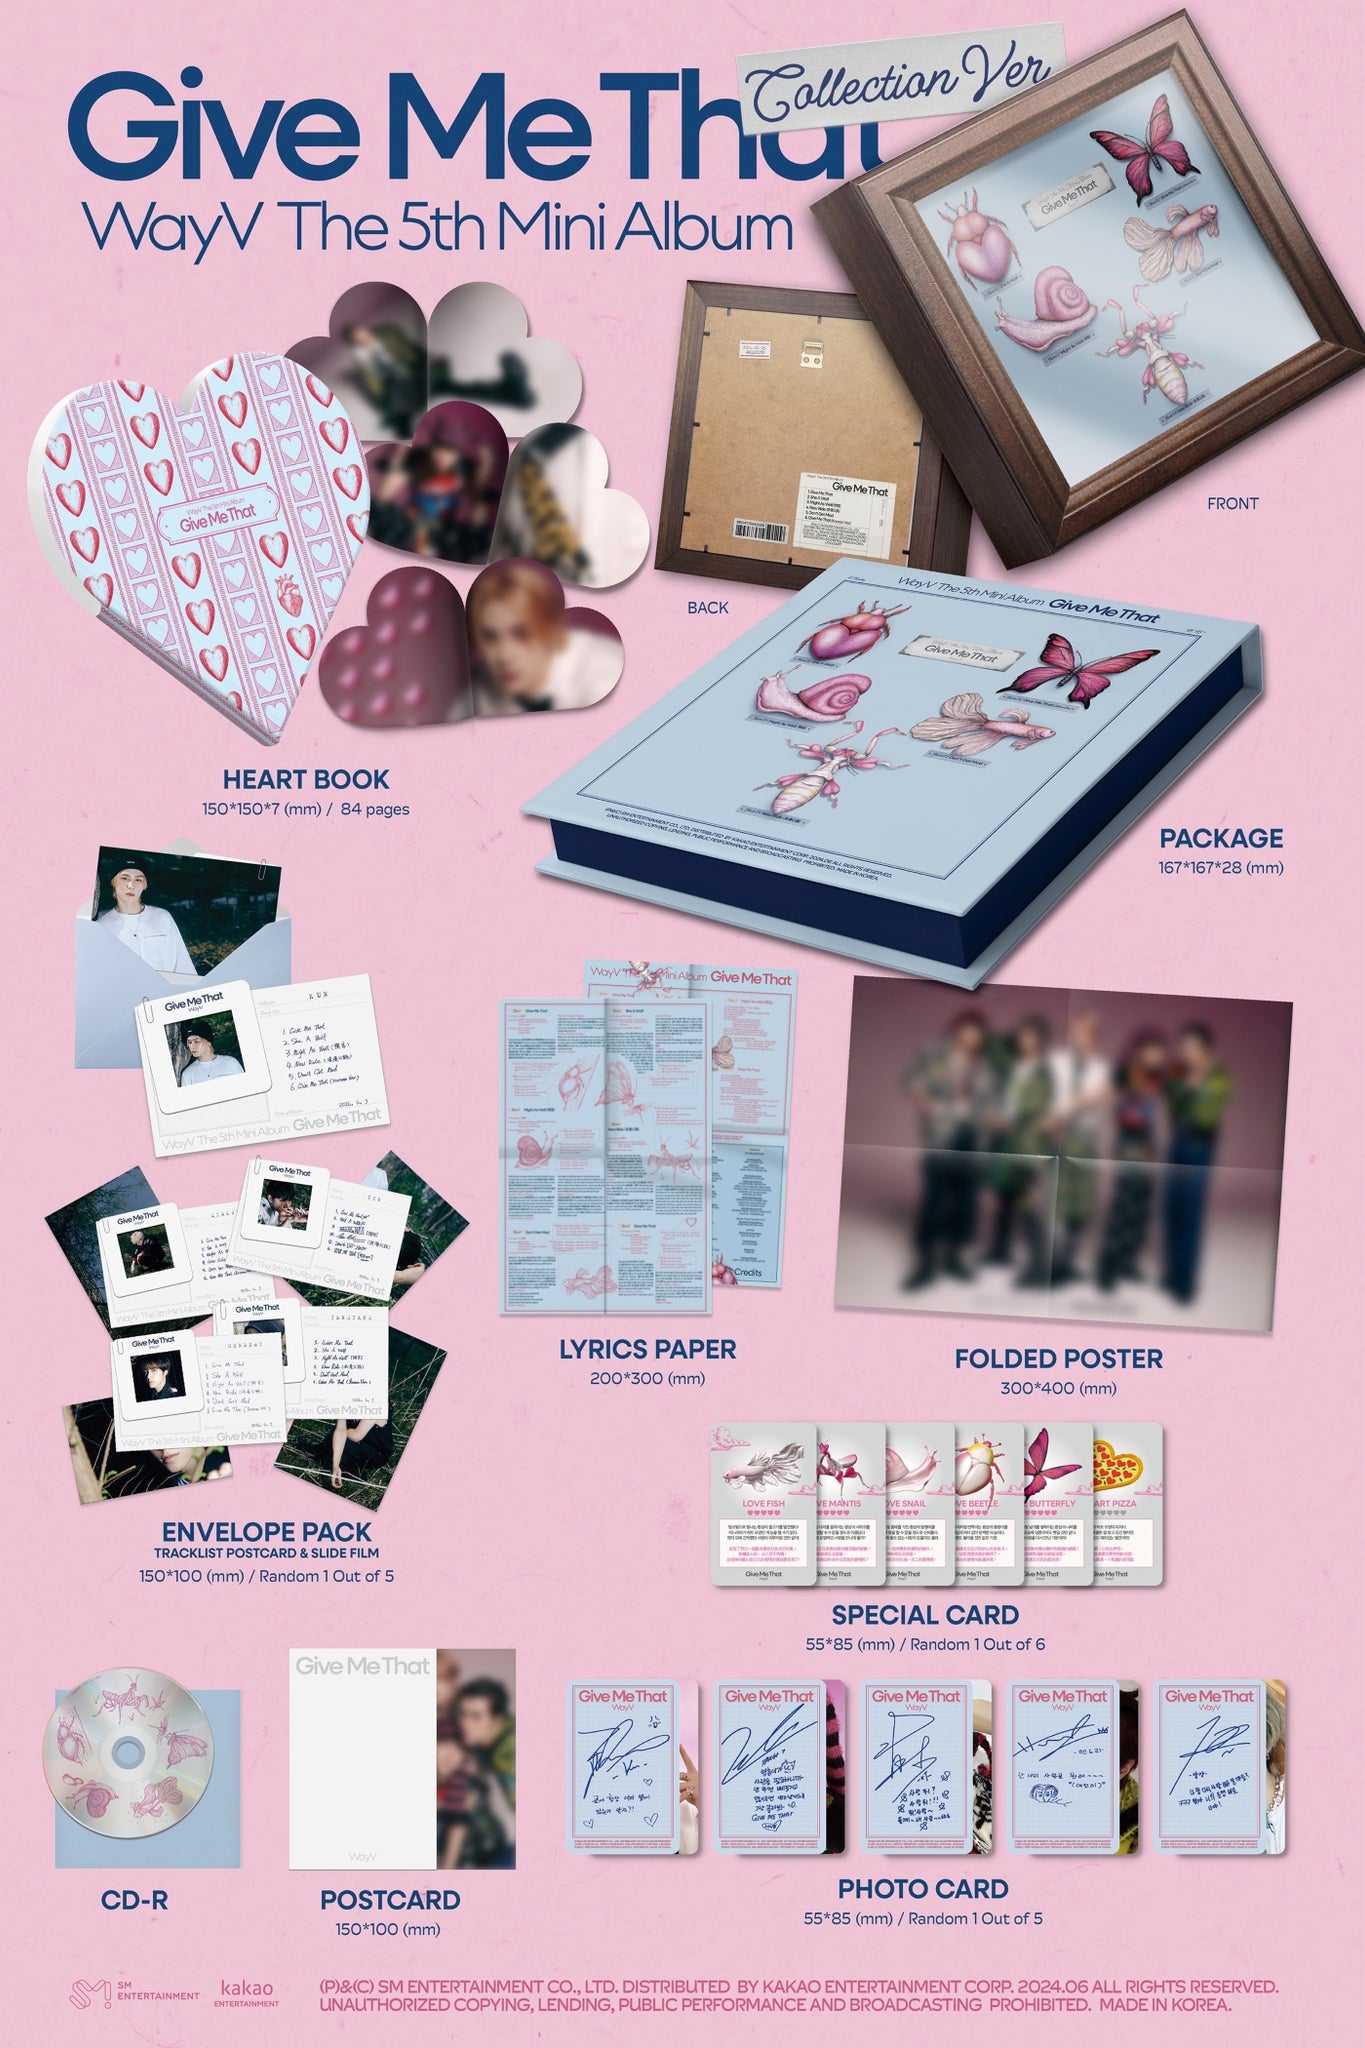 WayV 5th Mini Album Give Me That - Collection Version Inclusions: Package, Heart Book, CD, Lyrics Paper, Postcard, Envelope Pack, Special Card, Photocard